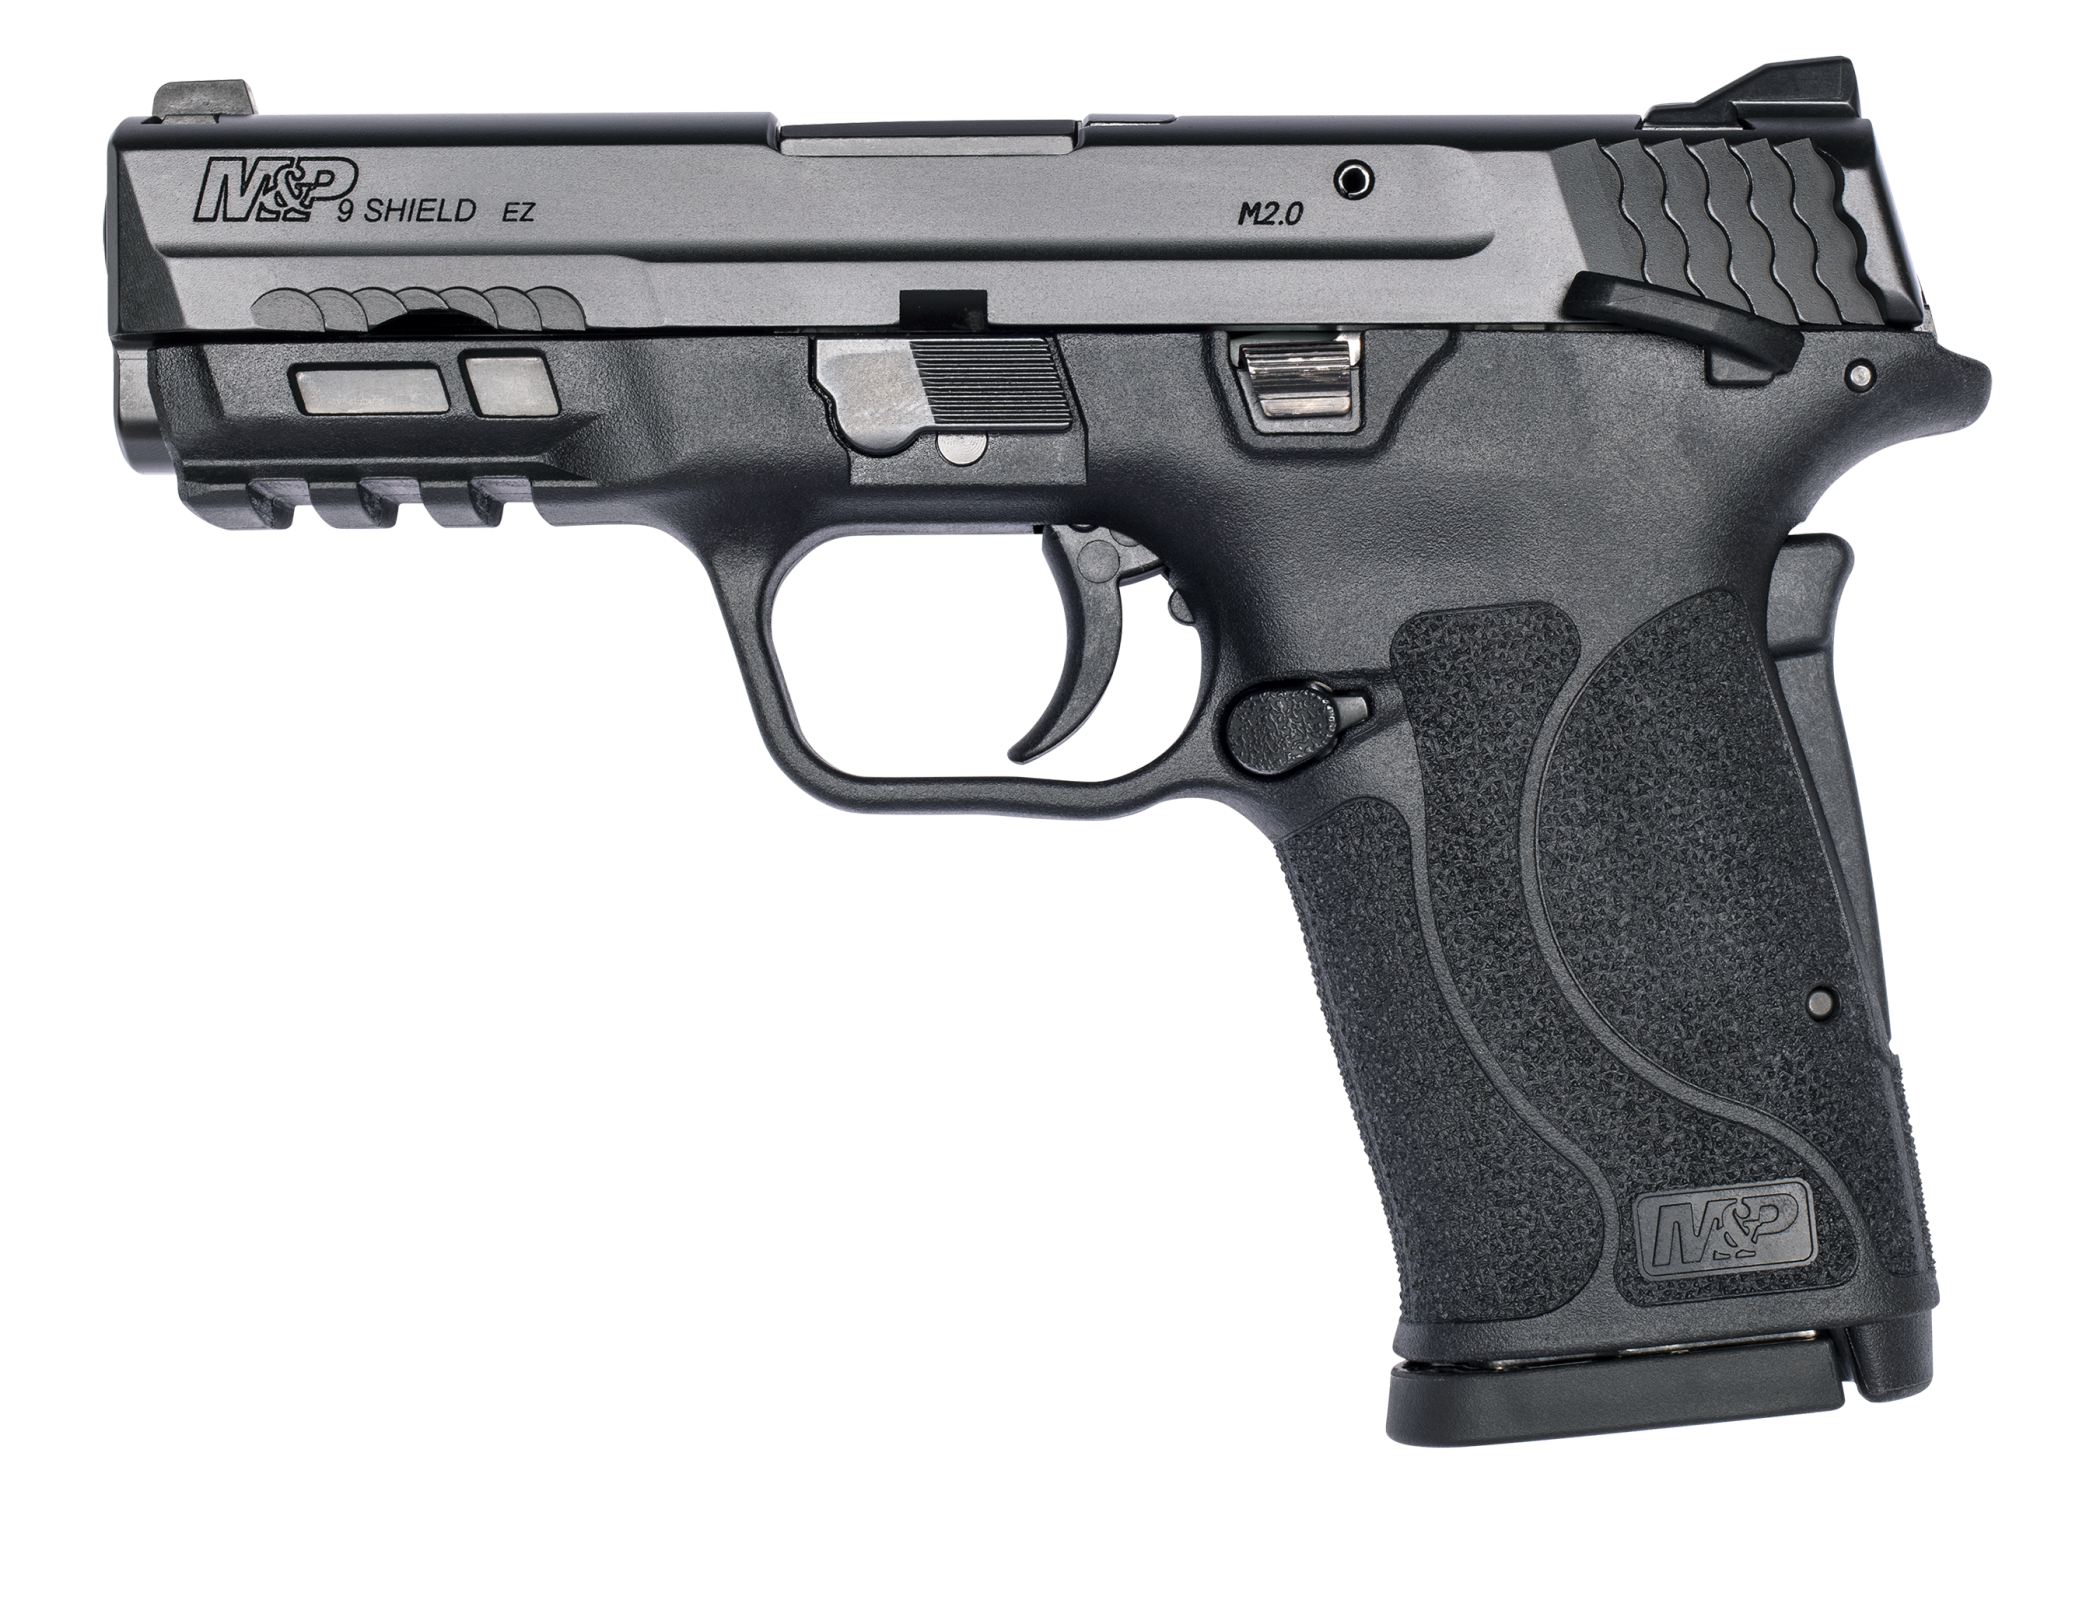 Smith & Wesson M&P9 2.0 Shield EZ 9mm with Night Sights and Manual Safety, Black (13001)